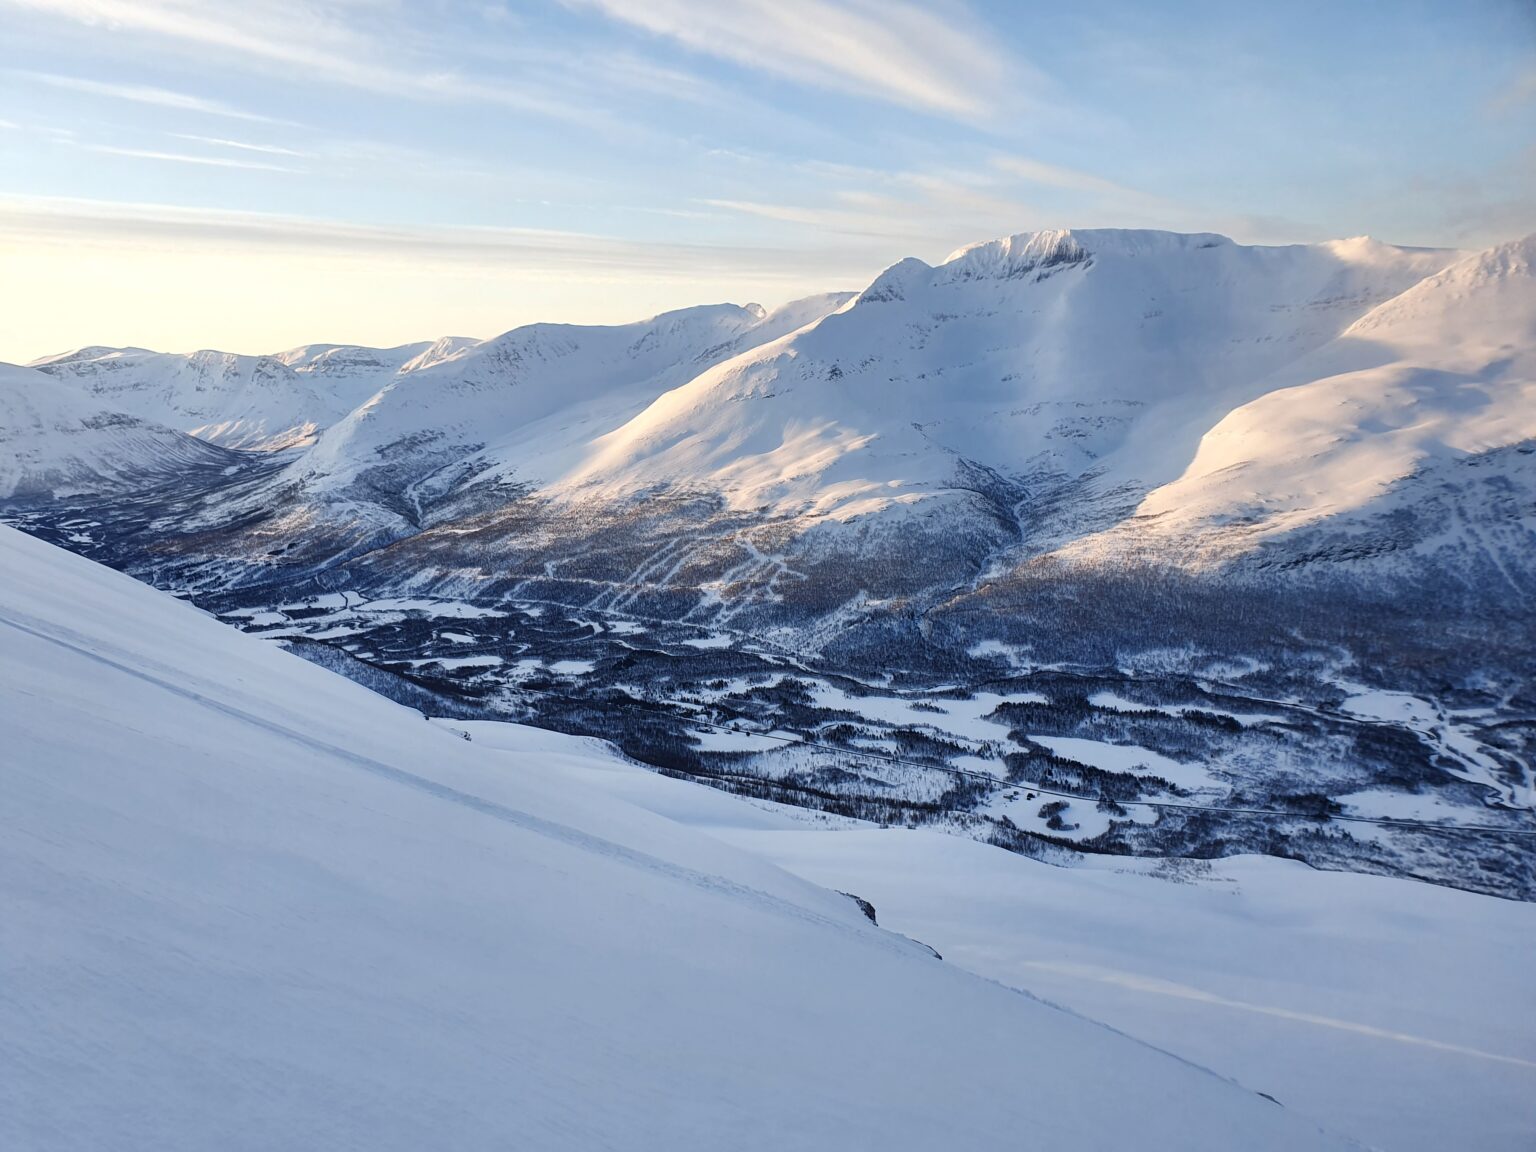 Sunrise over the Tamokdalen Valley after snowboarding the South chute of Háhttagáisi